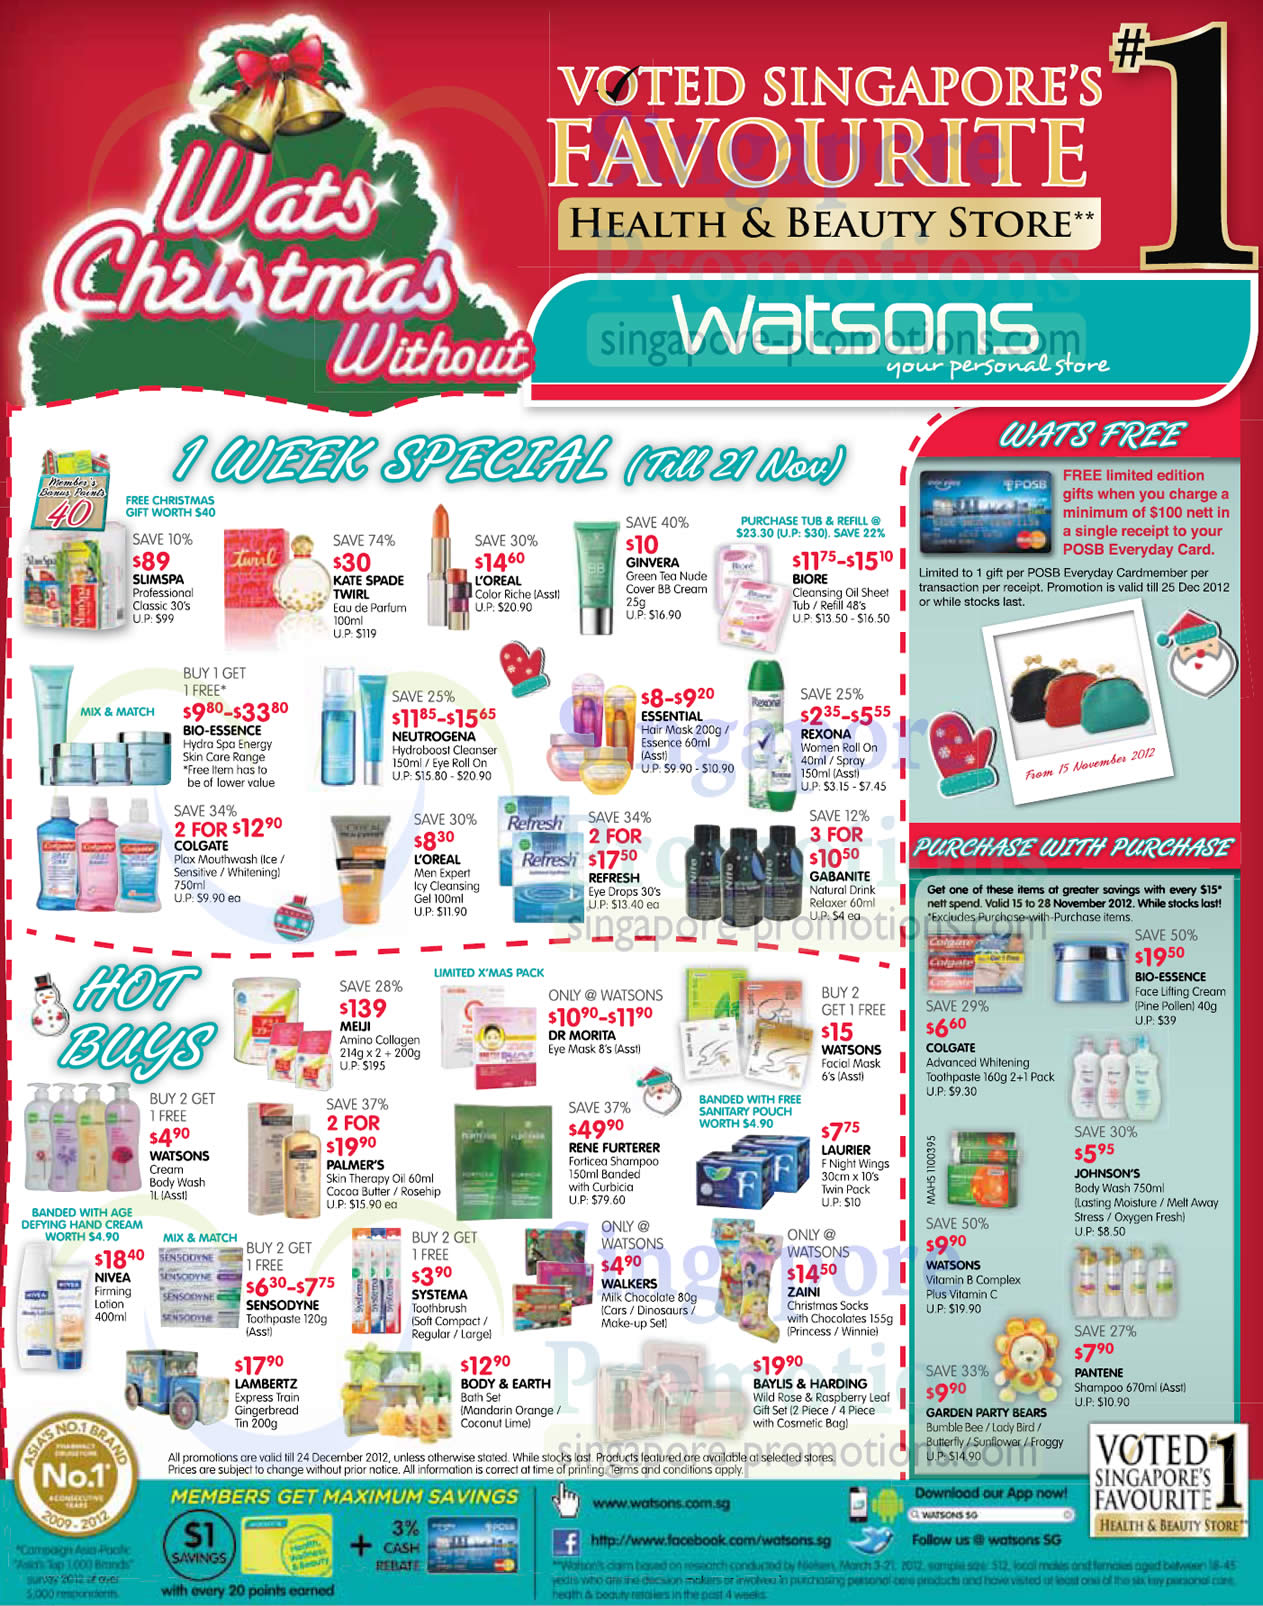 Featured image for Watsons Personal Care, Health, Cosmetics & Beauty Offers 15 - 21 Nov 2012